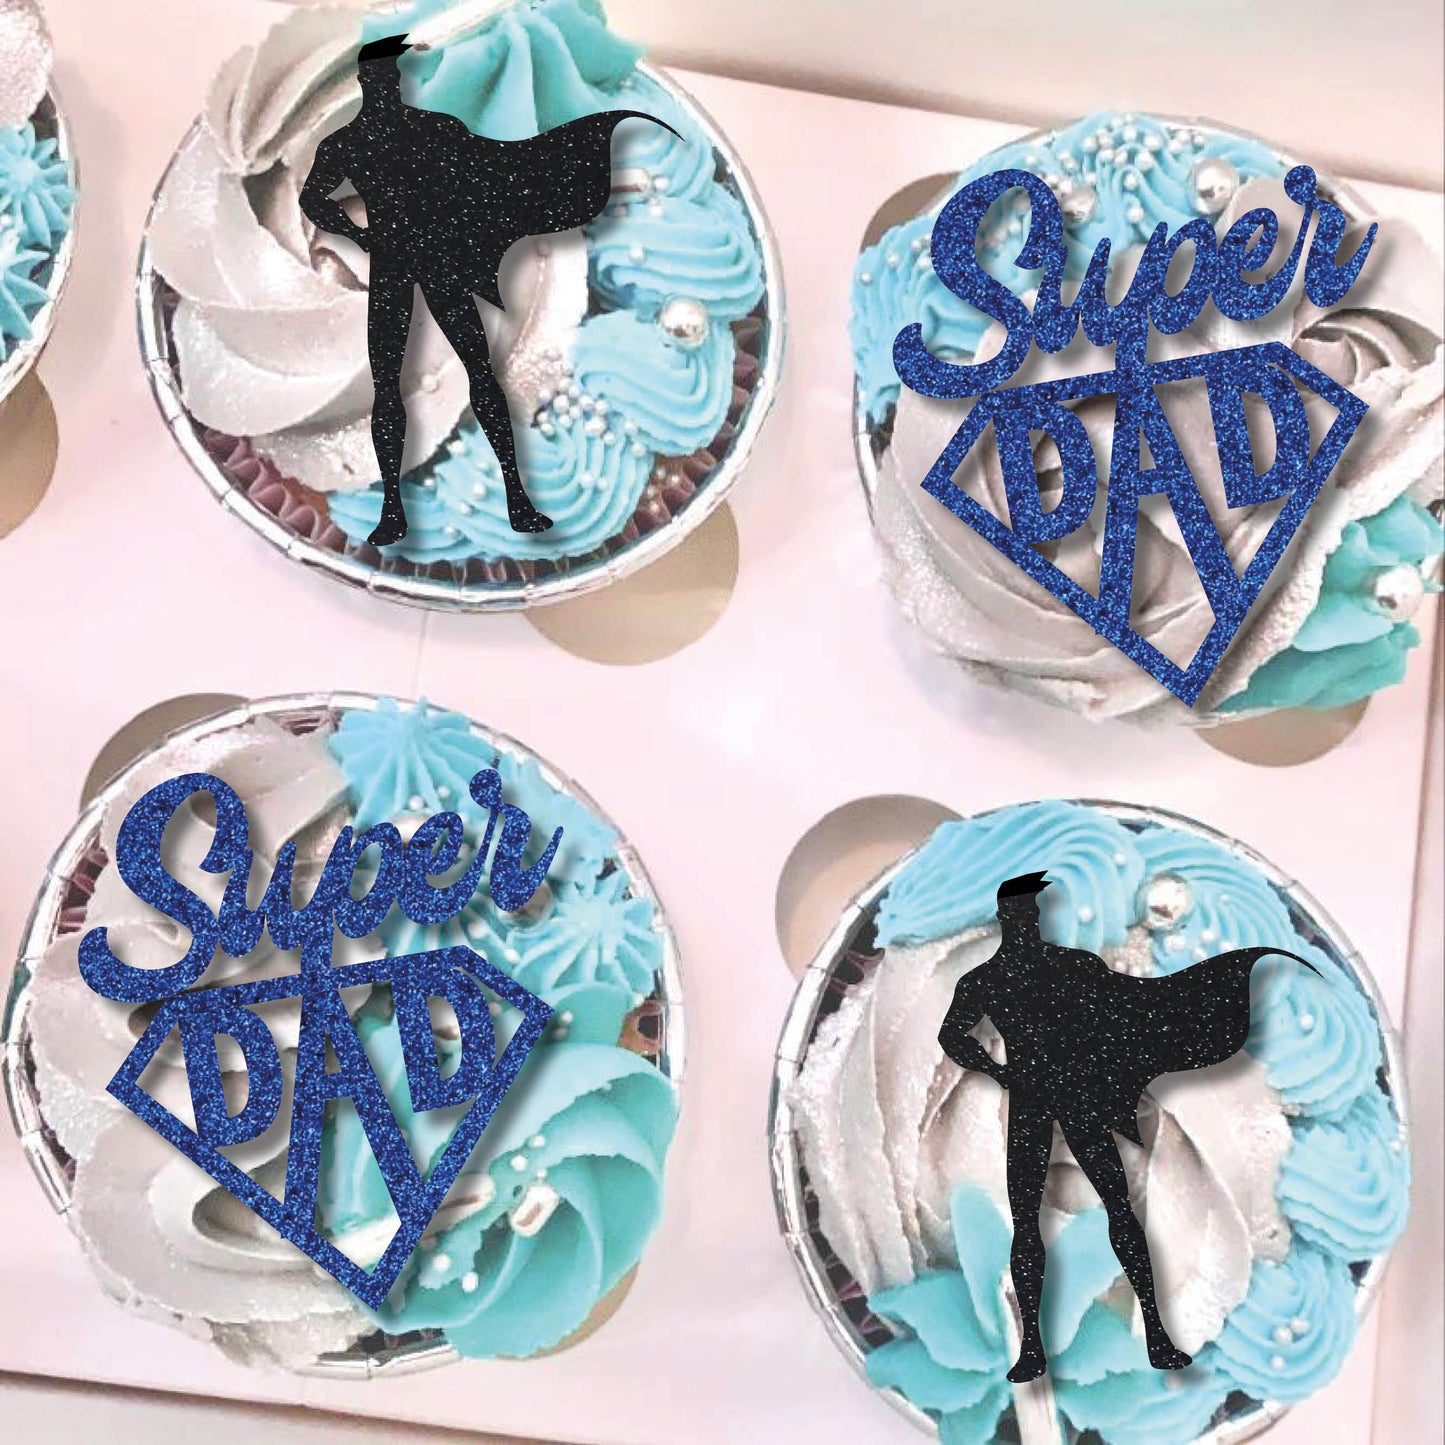 SUPER DAD - CUPCAKE TOPPERS